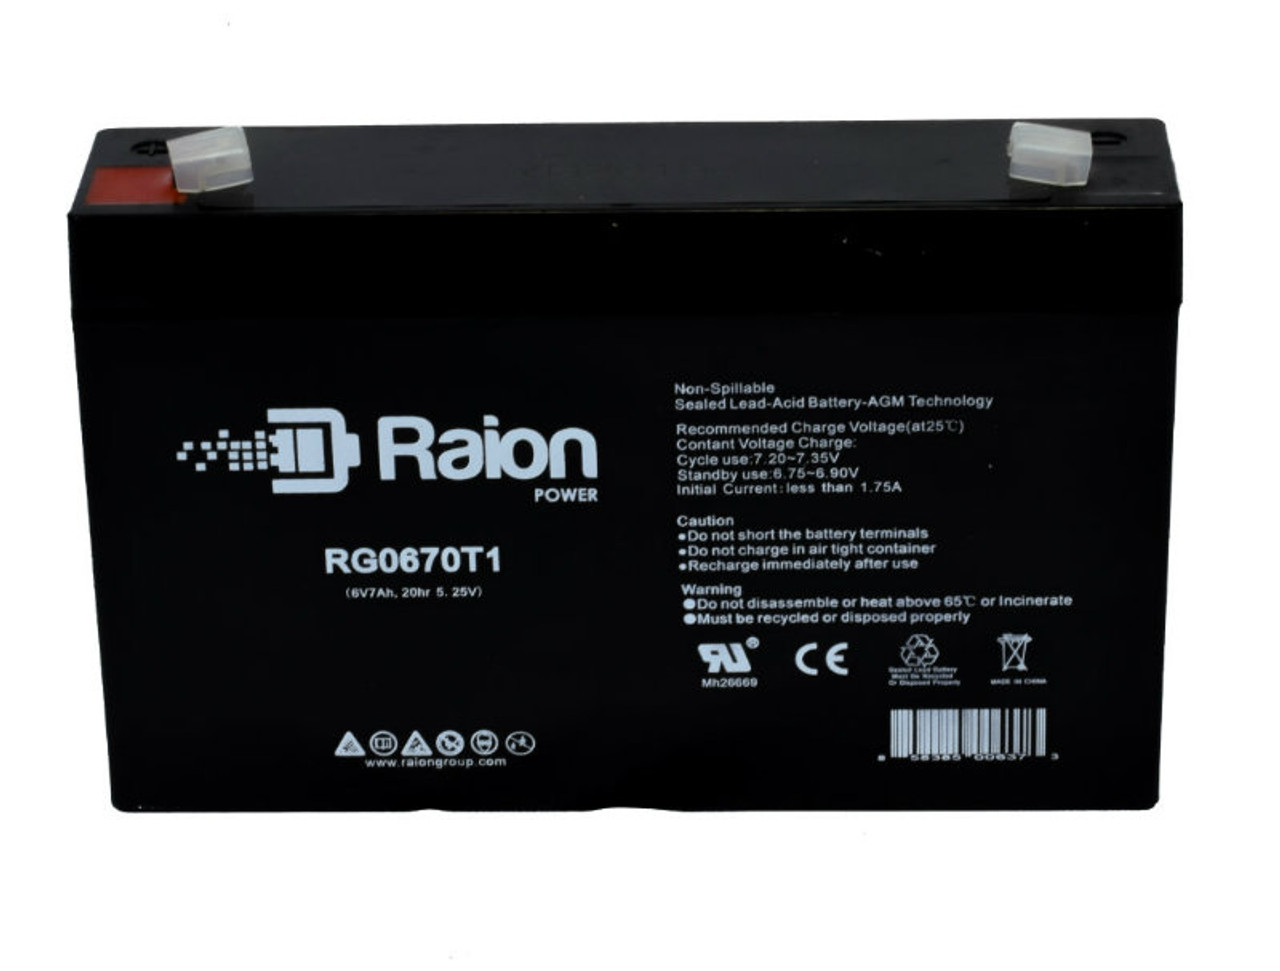 Raion Power RG0670T1 Replacement Battery Cartridge for Kid Motorz 0132 Motorbike Red